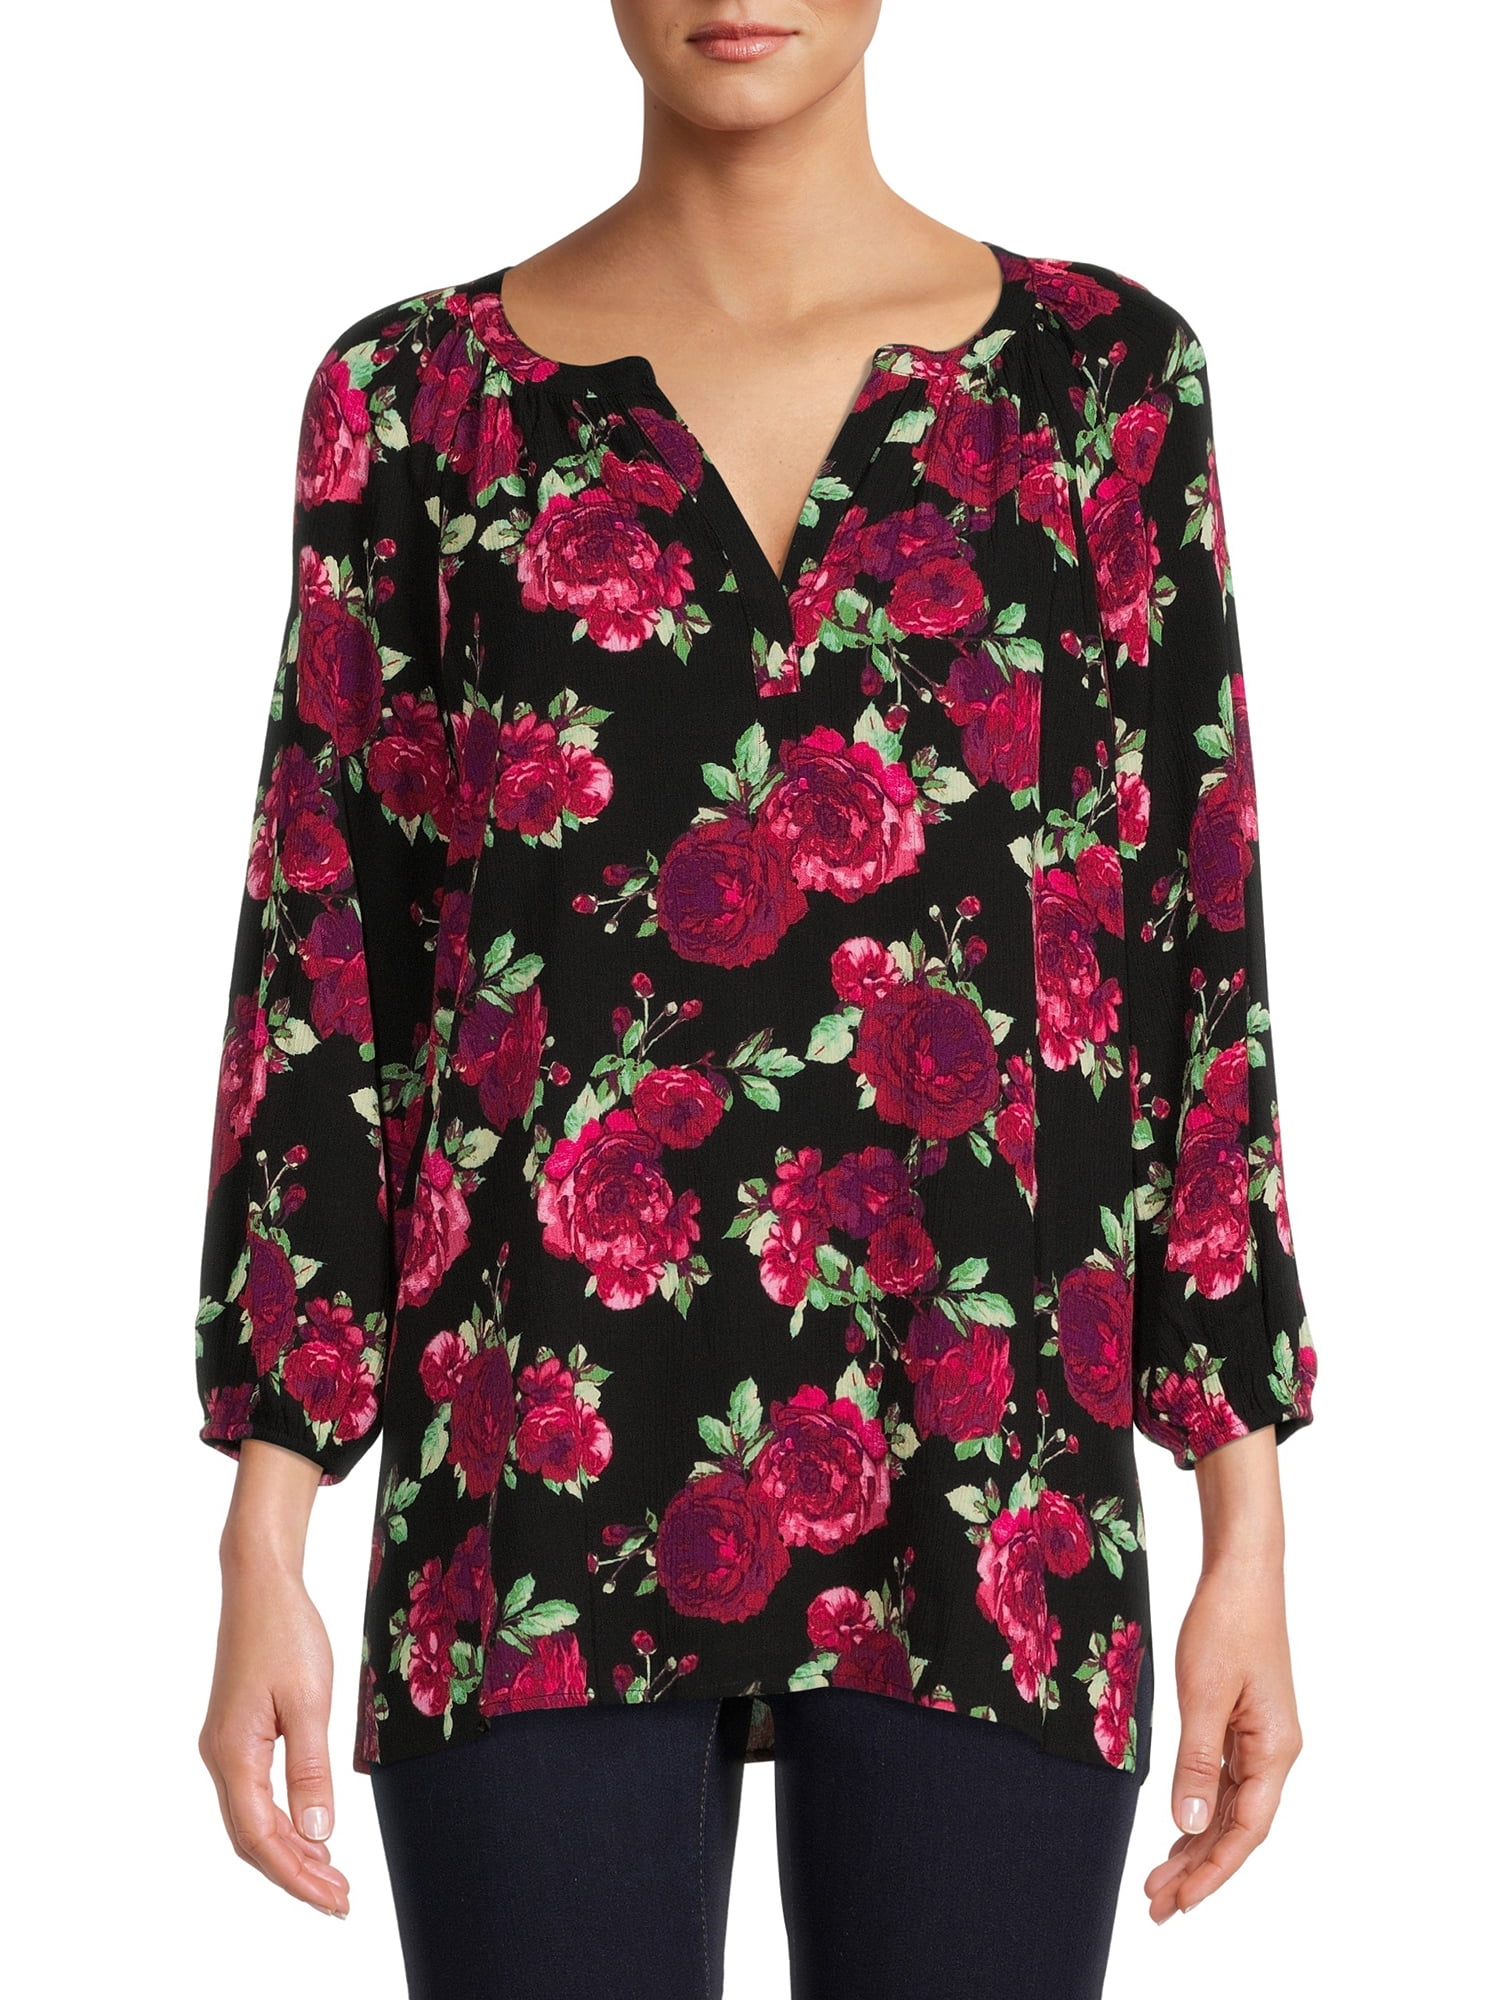 The Pioneer Woman Floral Peasant Blouse 4156